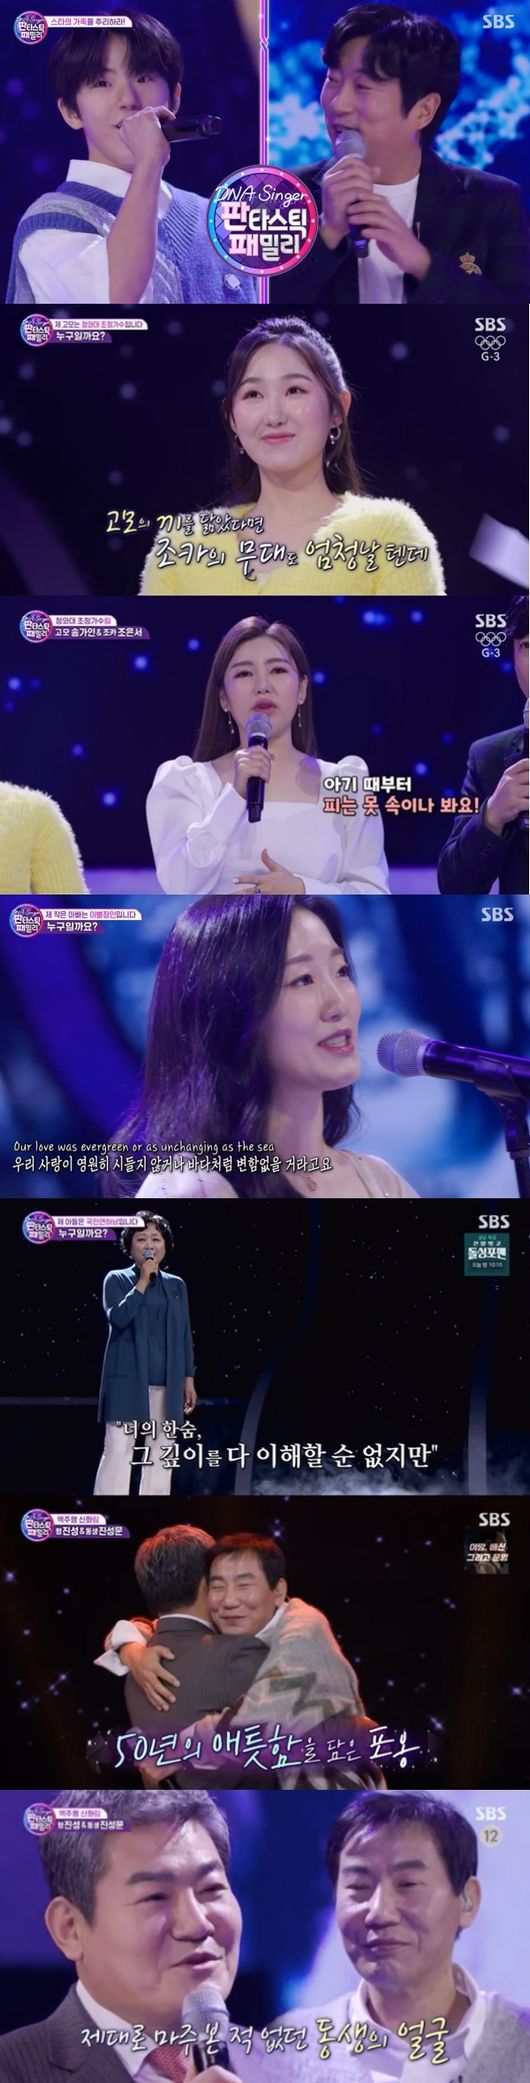 SBS New Years special music entertainment Fantastic Duo Family - DNA Singer (hereinafter Fantastic Duo Family) has caught the attention of viewers with high TV viewer ratings since its first broadcast.The Fantastic Duo Family, which was first broadcast on the 1st, ranked first in entertainment TV viewer ratings at the same time with an average TV viewer rating of 7.5% and the highest TV viewer ratings of 12.1% per minute, and the target indicator 2049 TV viewer ratings was also 2.4% (based on Nielsen Korea metropolitan area, households). It was the number one feature program on the show.On the day of the show, Lee Tae-joon, son of MC Lee Soo-geun, made an opening stage with Father Lee Soo-geun, and the stage of the two people, who resembled DNA, attracted attention.The first round match was Joka Daejeon.The judges were surprised by the keyword of the first DNA singer, My aunt is a singer invited to Cheong Wa Dae, followed by DNA singers on the stage of Joey - Hi.I thought it was a song that resembled my aunt who had blown away and said goodbye when she was in trouble, and now I called it to cheer, DNA Singer said of the reason for the selection.The second DNA singer called Think of Me, famous for the ghost of the opera, and impressed.While everyone was fluttering in the appearance of the talented person, DNA keyword was farewell master.DNA Singer was convinced that if you have parted, no one will have heard a small Father song.As a result of the first group confrontation, the first DNA singer was defeated and her aunt Song Gain appeared as a star singer.The two people who resemble each other laughed, and the two people enthusiastically sang Be a Cain, raising the atmosphere of the scene.The second group was Impression War. The first DNA singer, whose DNA keyword the son of the people, was a normal housewife, confusing the judges Murder and She Wrote.DNA Singer said, I want to tell my son that I can breathe.The trembling seemed to be conveyed as it was, but the judges shed tears on the stage of the DNA singer, and Yang Hee-kyung added, I was also an actor who was going the same way as me.The second DNA keyword of the DNA singer was reverse driving myth. The 53-year-old DNA singer said, When I was a child, my brother was left to my relatives house because of my parents circumstances.My brother and I have been separated for more than 50 years. The judges selected singer Jo Hang Jo as a leading star singer Murder, She Wrote, and DNA singer selected Jo Hang Jo - Thank you.The DNA singer did not sing the lyrics for a while while crying during the stage, but everyone was impressed by the sincere stage of the DNA singer who had his brother.As a result of the confrontation, the first DNA singer won and the second DNA singer star singer, Jin Sung was introduced.This scene was the highest TV viewer ratings per minute with 12.1%.Jin Sung gave another impression with his brother, singing Borit Pass.The Fantastic Duo Family - DNA Singer, which has increased the possibility of regular programming with high TV viewer ratings from the first broadcast, will be broadcast twice at 6 pm on the 2nd.In the second broadcast, it is expected that the Identity of star singers who have not yet been released, as well as the more powerful duet stages will be anticipated and interesting.SBS Fantastic Duo Family broadcast capture